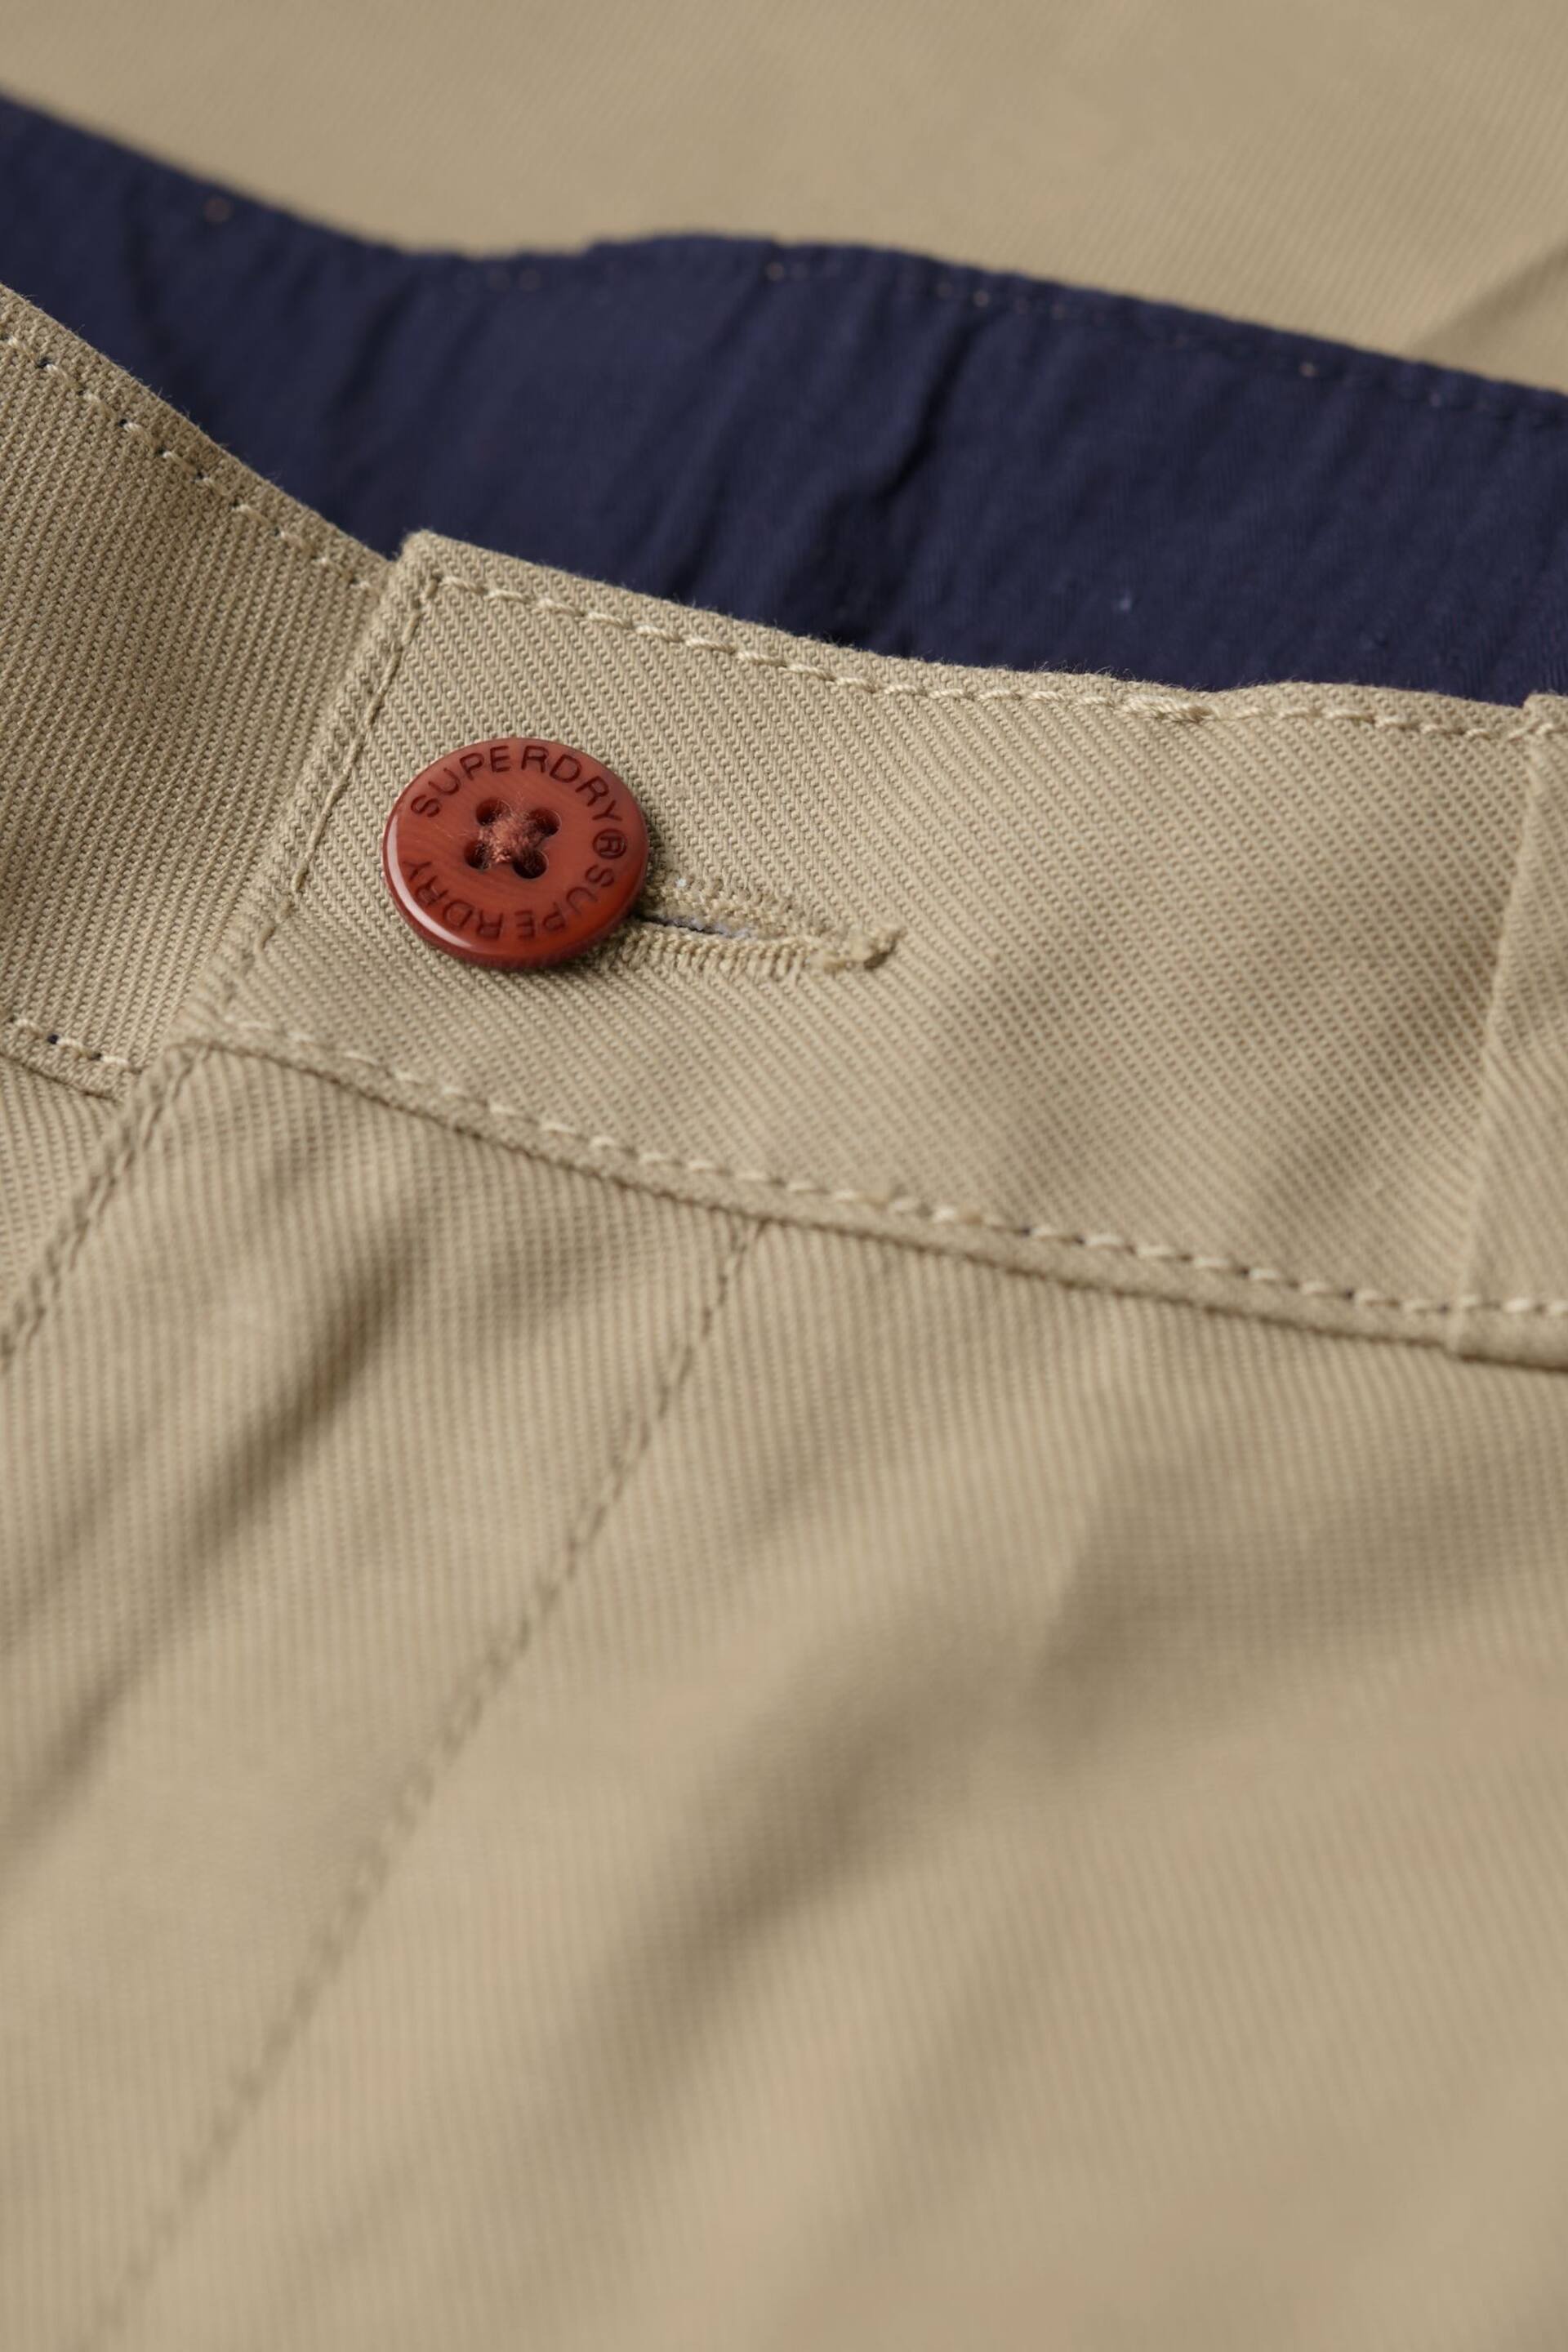 Superdry Brown Straight Chinos Trousers - Image 5 of 6